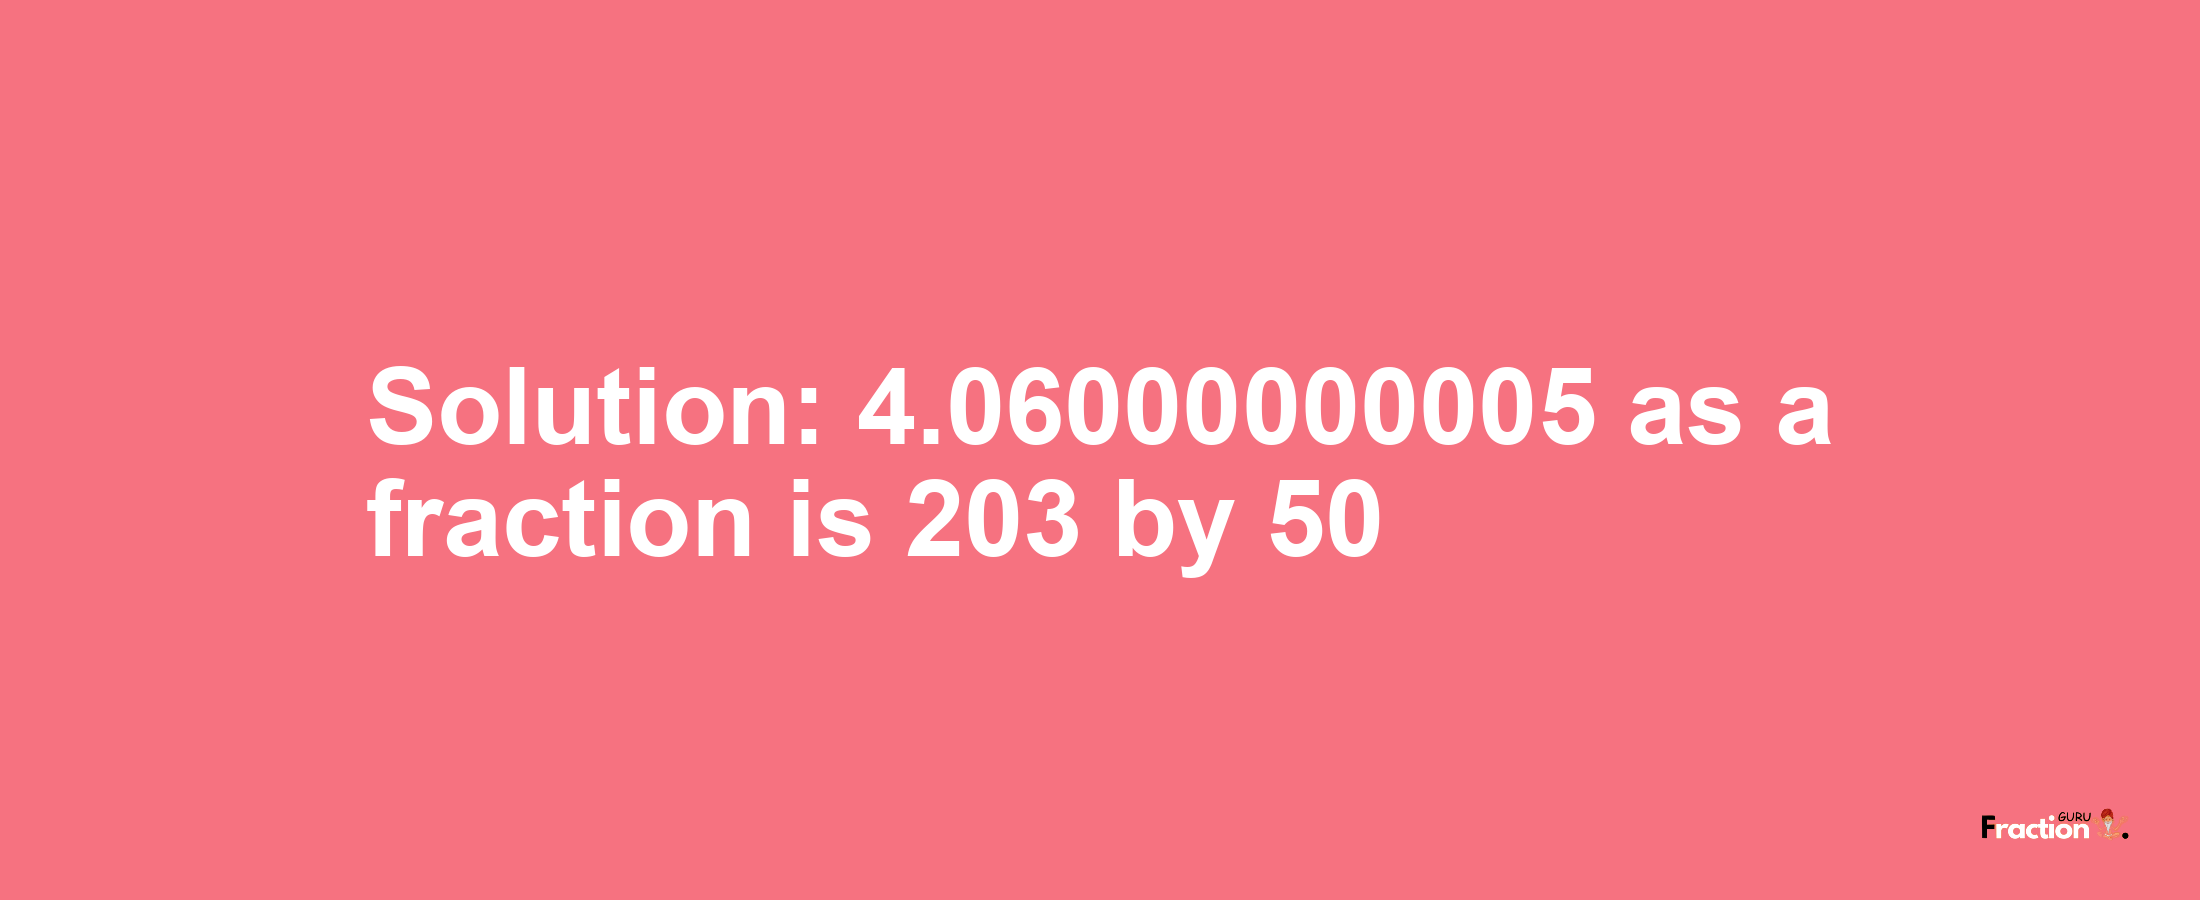 Solution:4.06000000005 as a fraction is 203/50